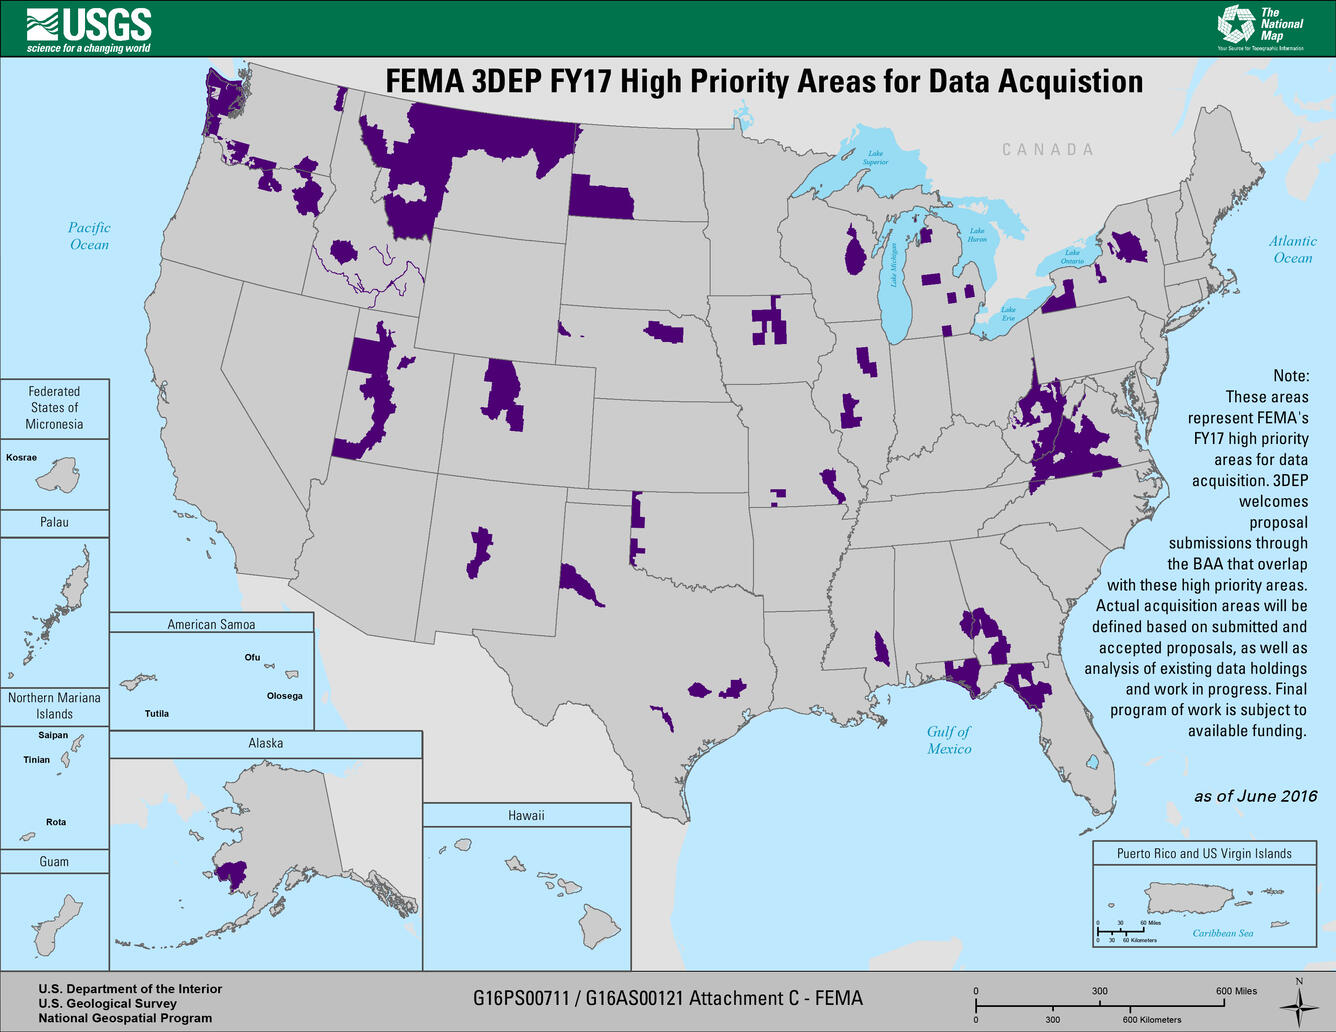 Map showing FEMA 3DEP FY17 High Priority Areas for Data Acquisition